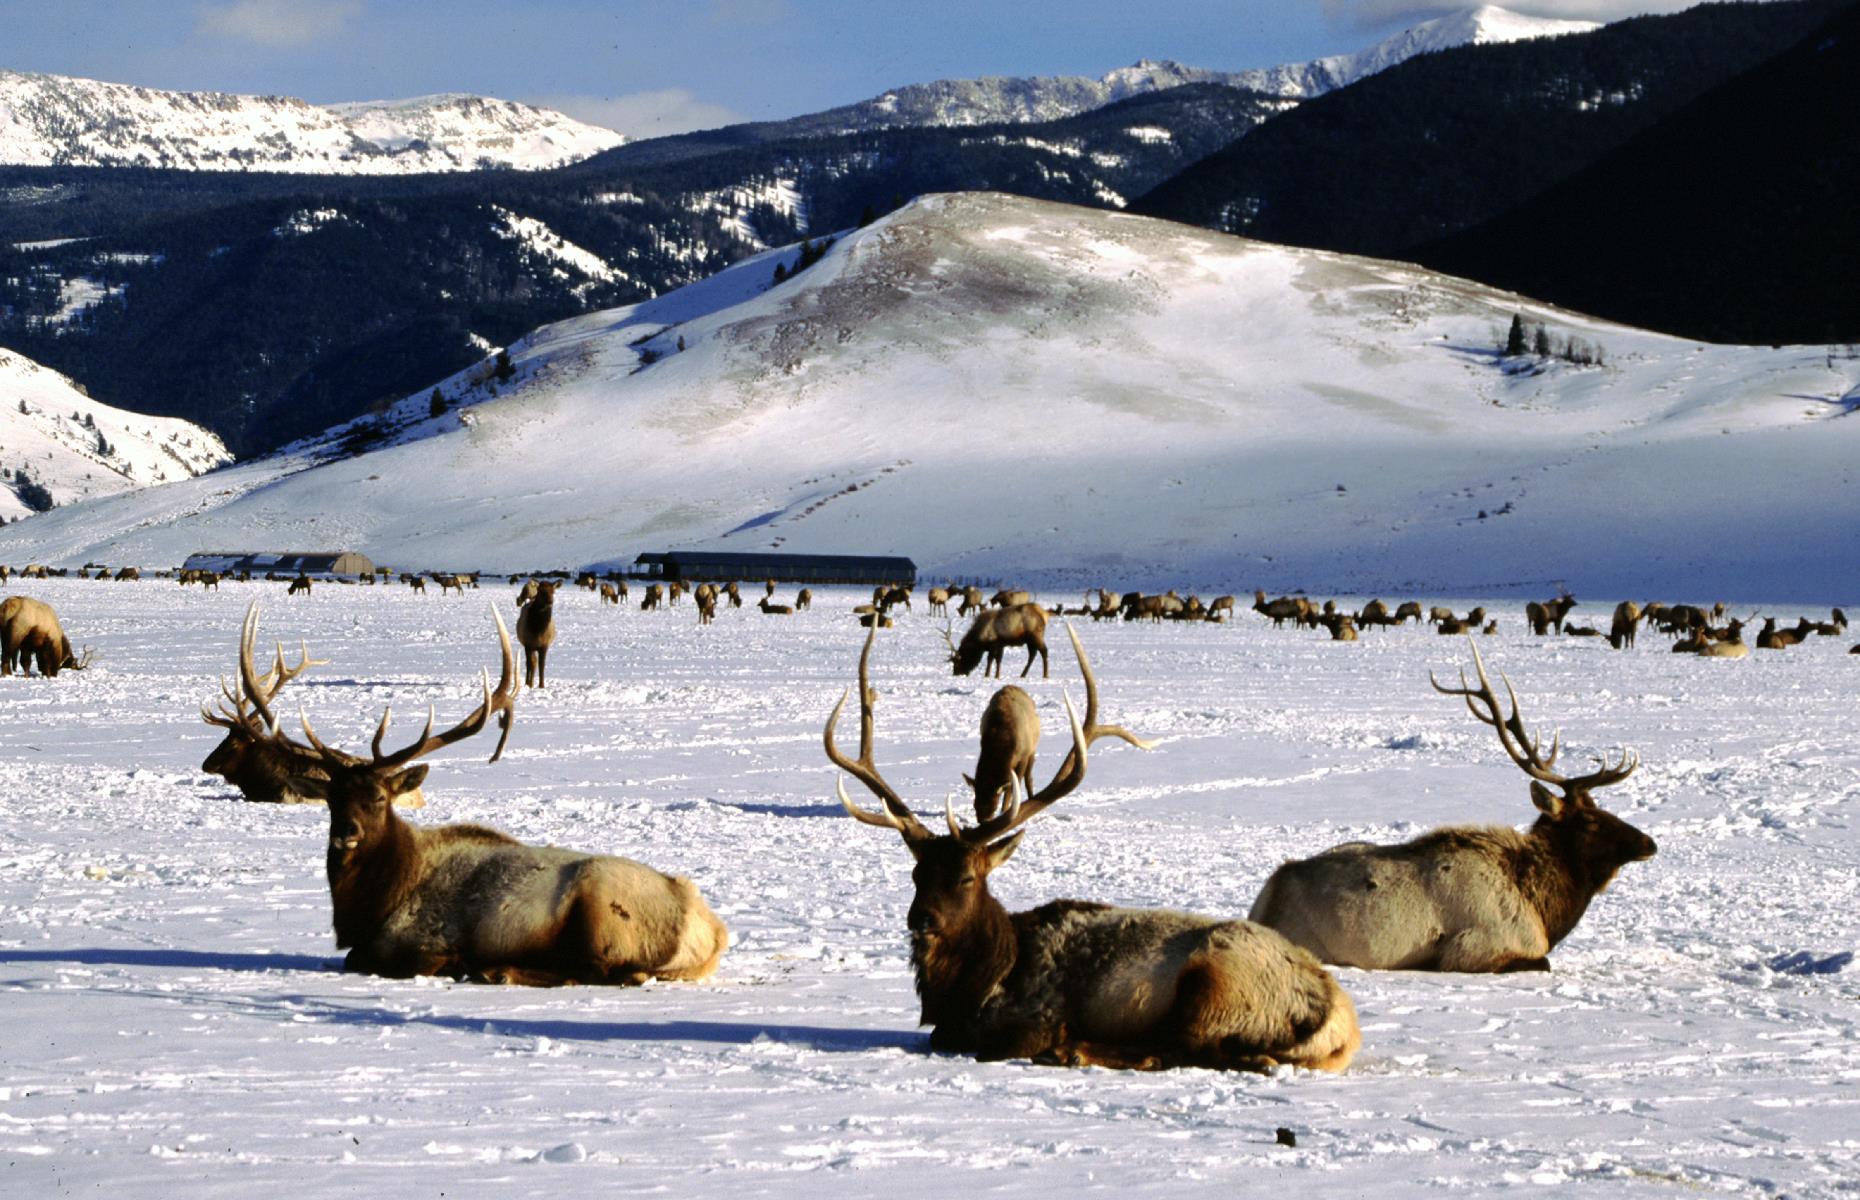 <p><a href="https://www.fws.gov/refuge/national_elk_refuge/">This stunning refuge</a> sprawls over 24,700 acres, close to Grand Teton National Park, and its meadows provide a habitat for wintering elk each year. The site was established in the early 19th century after rapid development affected the migratory routes of the Jackson Elk Herd, and today that herd numbers around 11,000. Beyond the elk themselves, you'll get fantastic views of the Teton Range and may also spot bison, trumpeter swans, bald eagles and bighorn sheep. Now check out <a href="https://www.loveexploring.com/galleries/101268/americas-most-beautiful-mountains-to-explore-this-fall?page=1">America's most beautiful mountains to explore this fall</a>.</p>